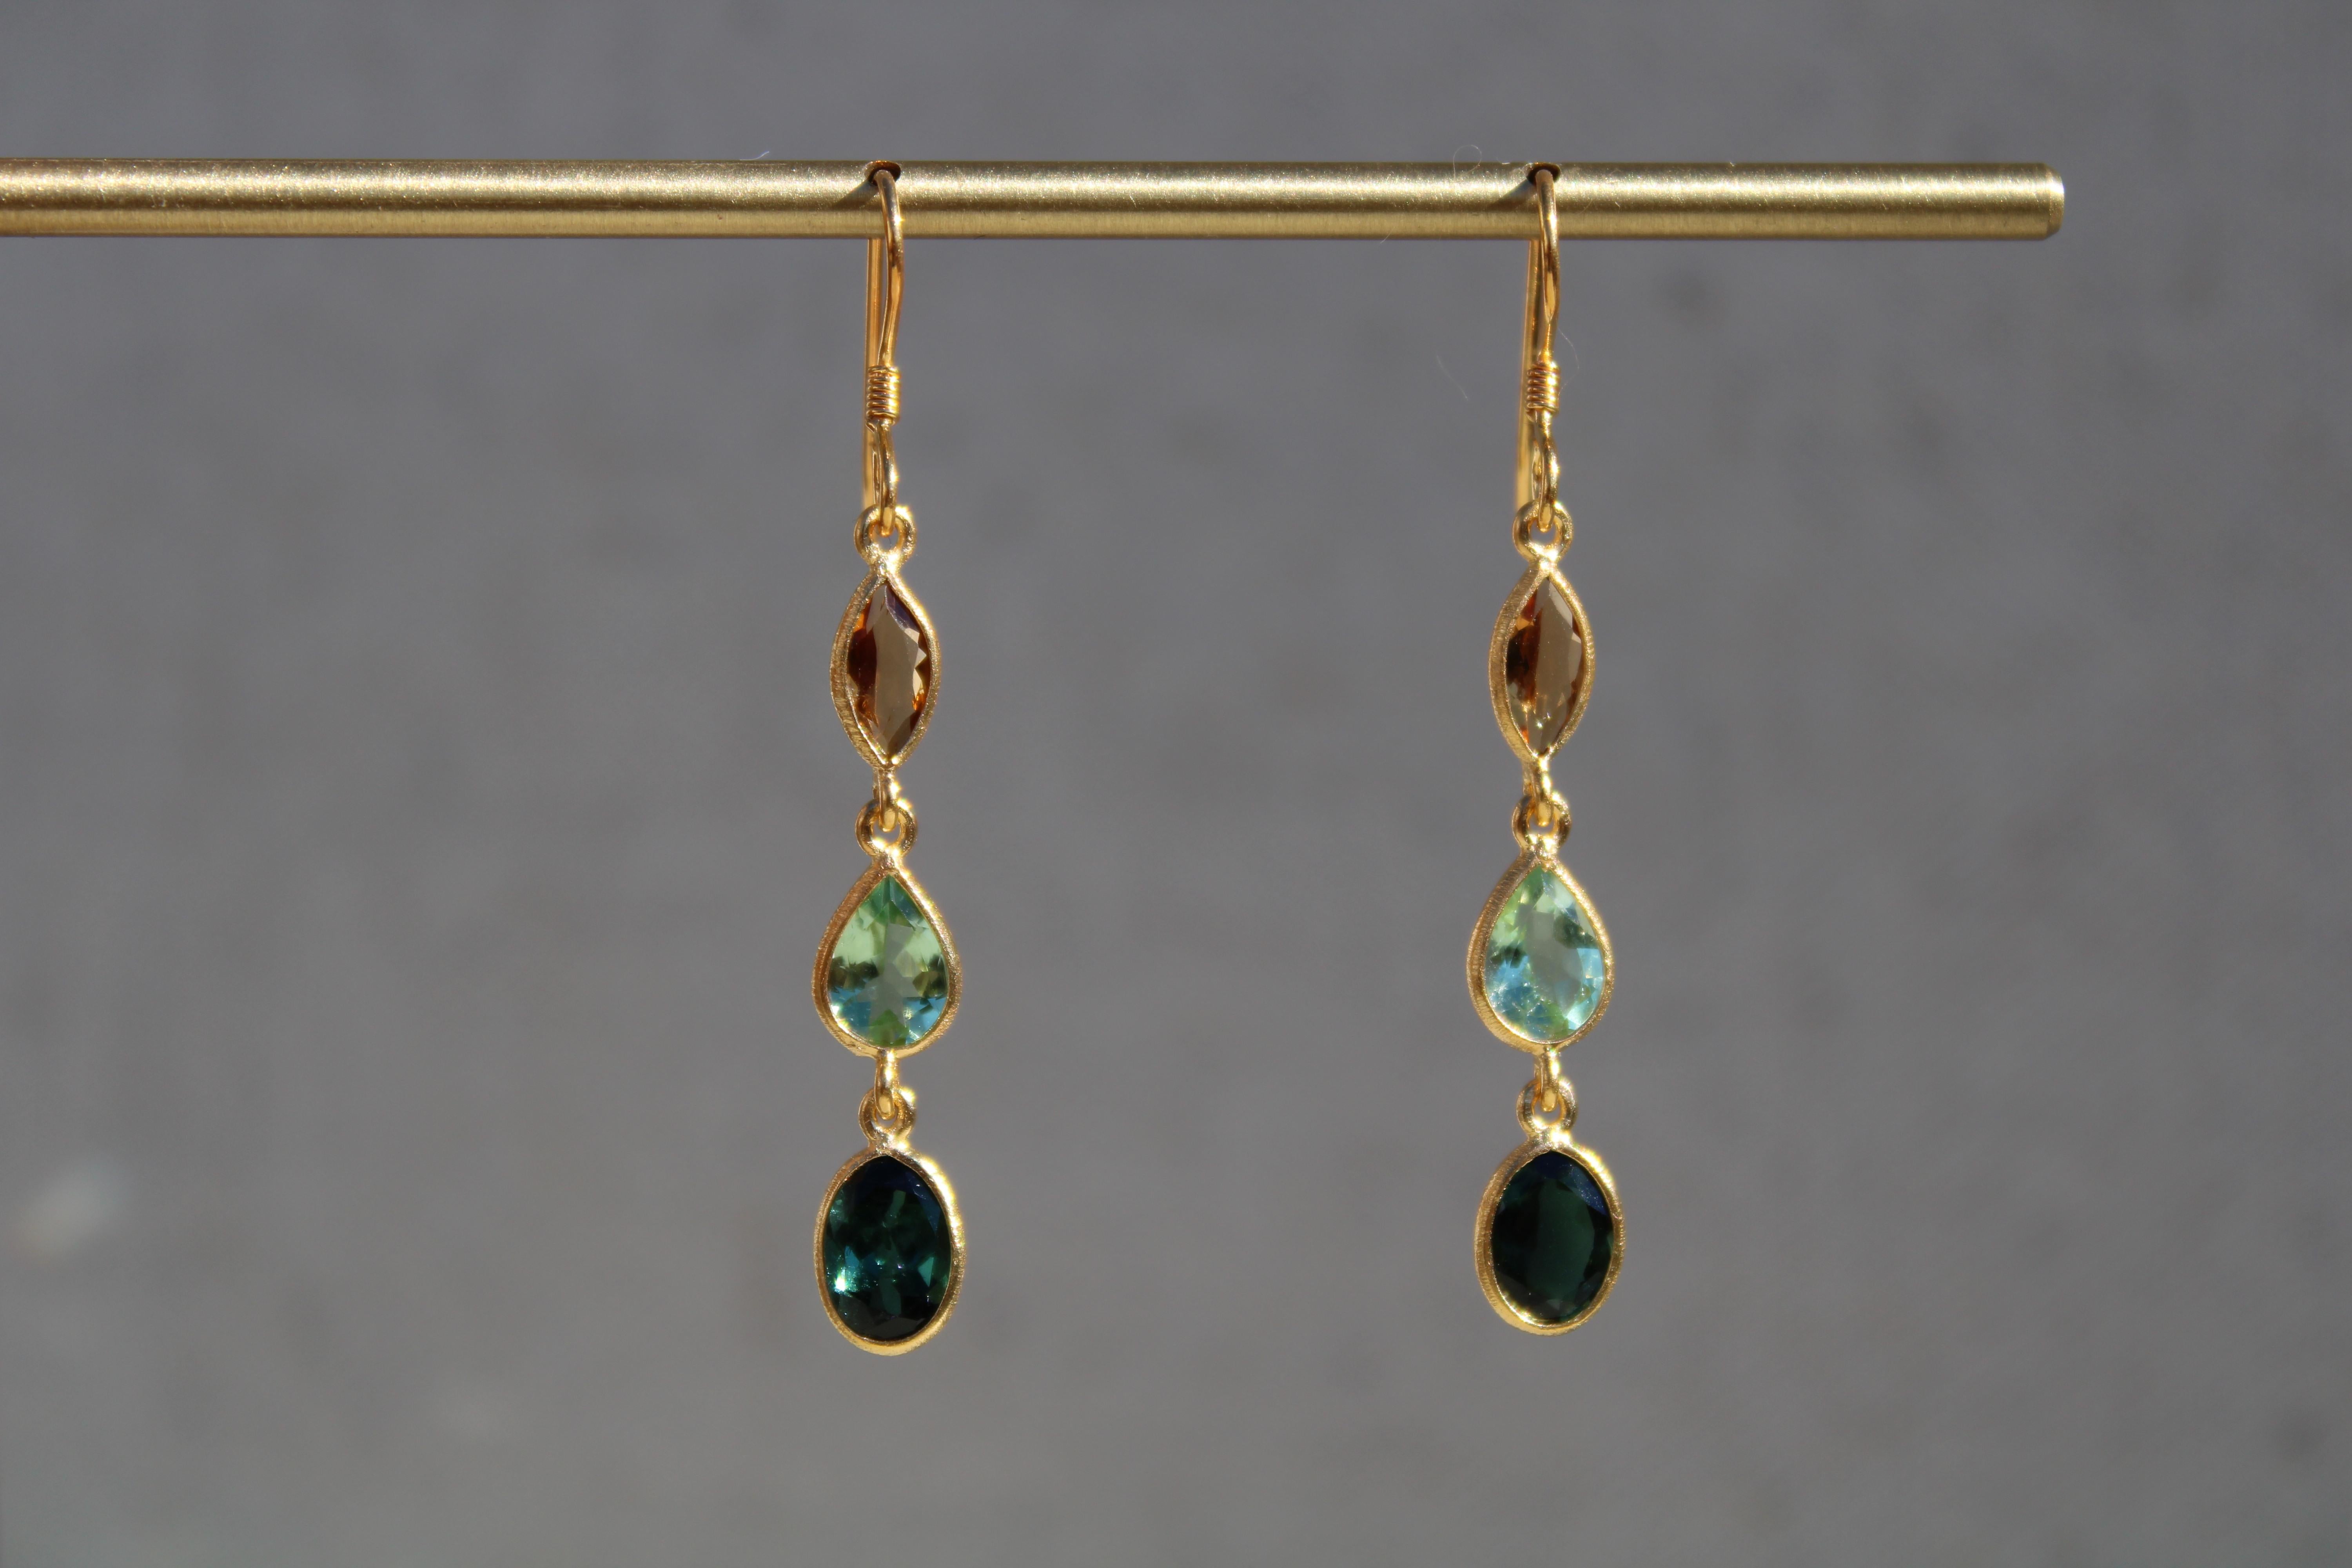 This pair of 3.4 ct three- stone dangle earrings are comprised of marquise honey Citrine, sage green Tourmaline pears, and hunter green Tourmaline oval cut stones. They are set in a 14K gold plated bezel minimal setting which allows for the stone to